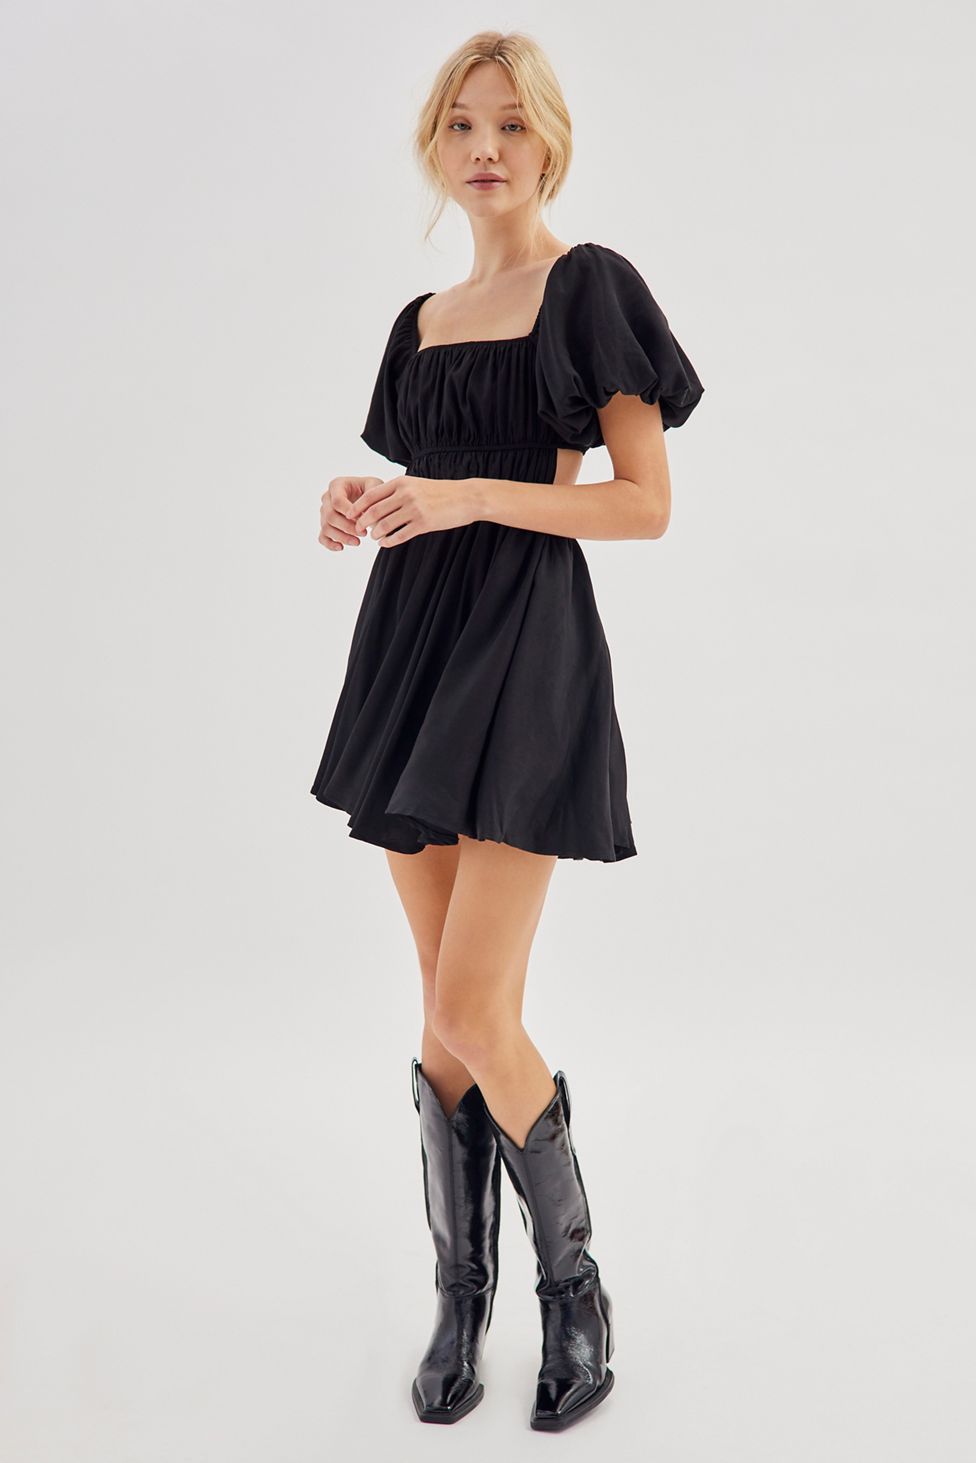 28 Simple Dresses to Wear With Tall Boots